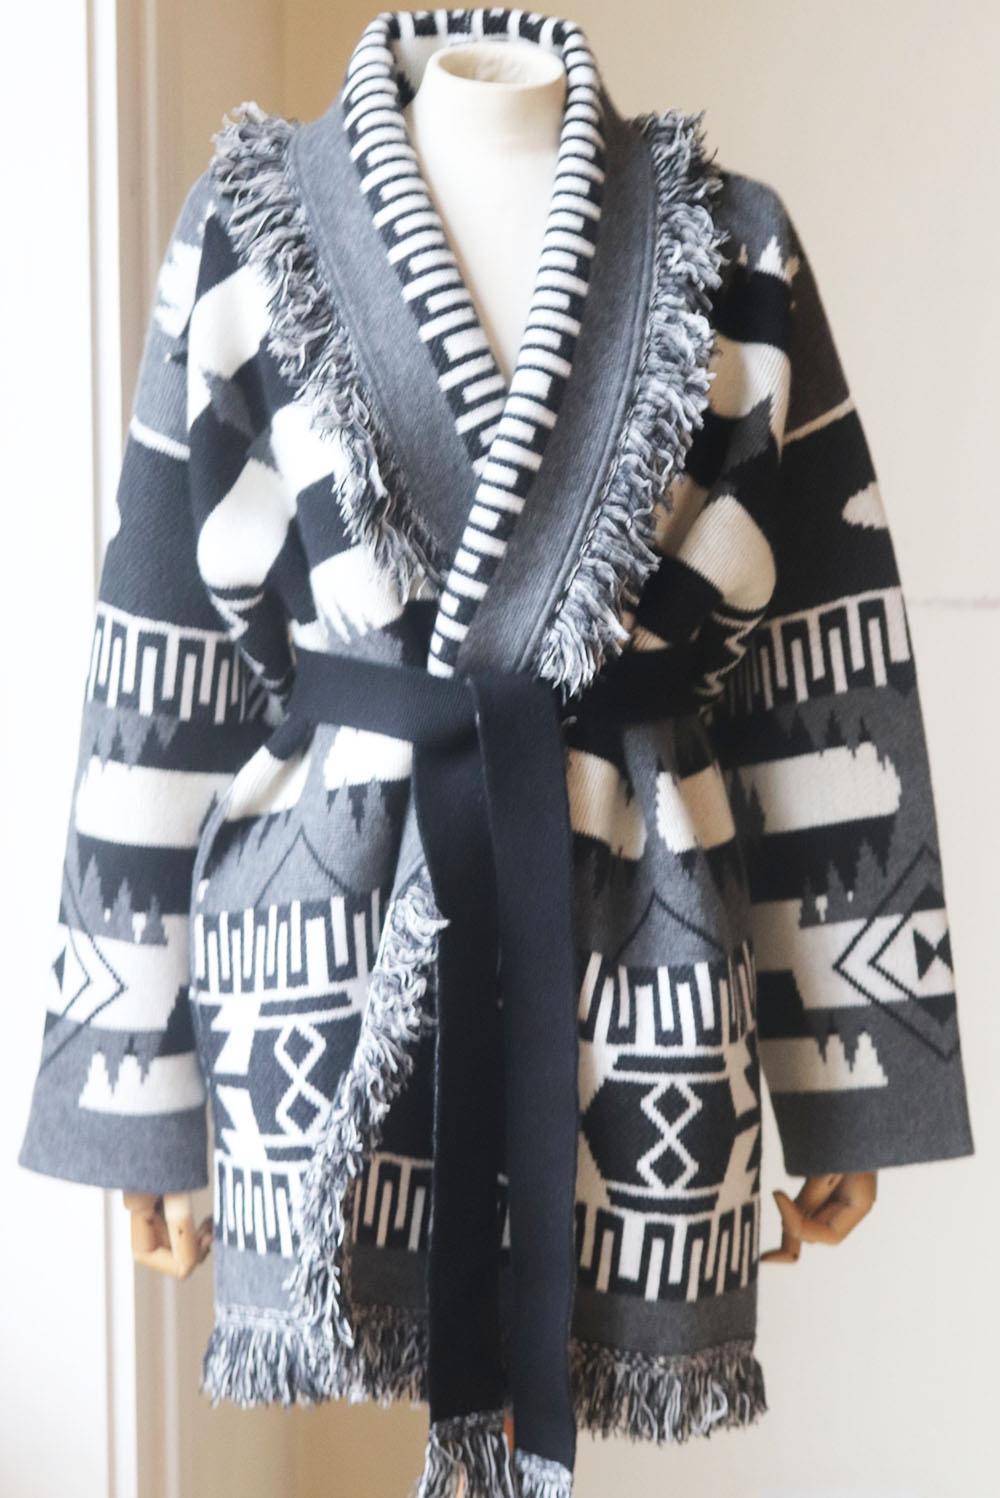 Alanui was founded after Nicolò Oddi discovered a vintage cardigan at the Rose Bowl flea market in Los Angeles, taking up to 15 hours to knit and assemble, this style is spun from jacquard-cashmere woven with Native American-inspired motifs. Black,